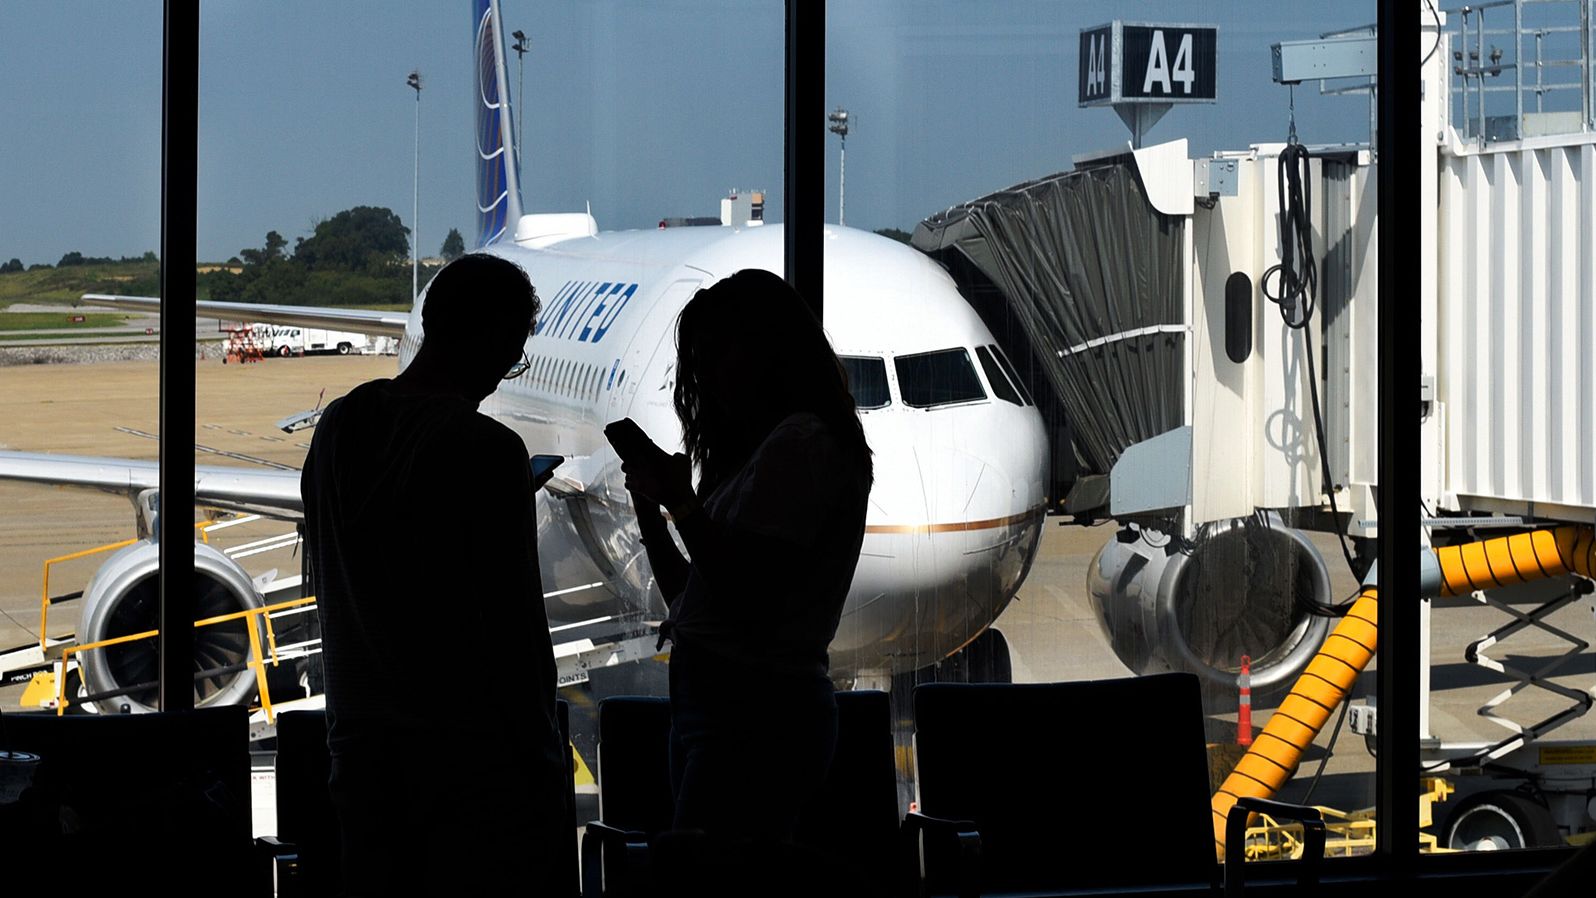 NASHVILLE, TENNESSEE - SEPTEMBER 4, 2019: A couple silhouetted in front of a window use their smartphones in the terminal gate area before boarding a plane at Nashville International Airport in Nashville, Tennessee.